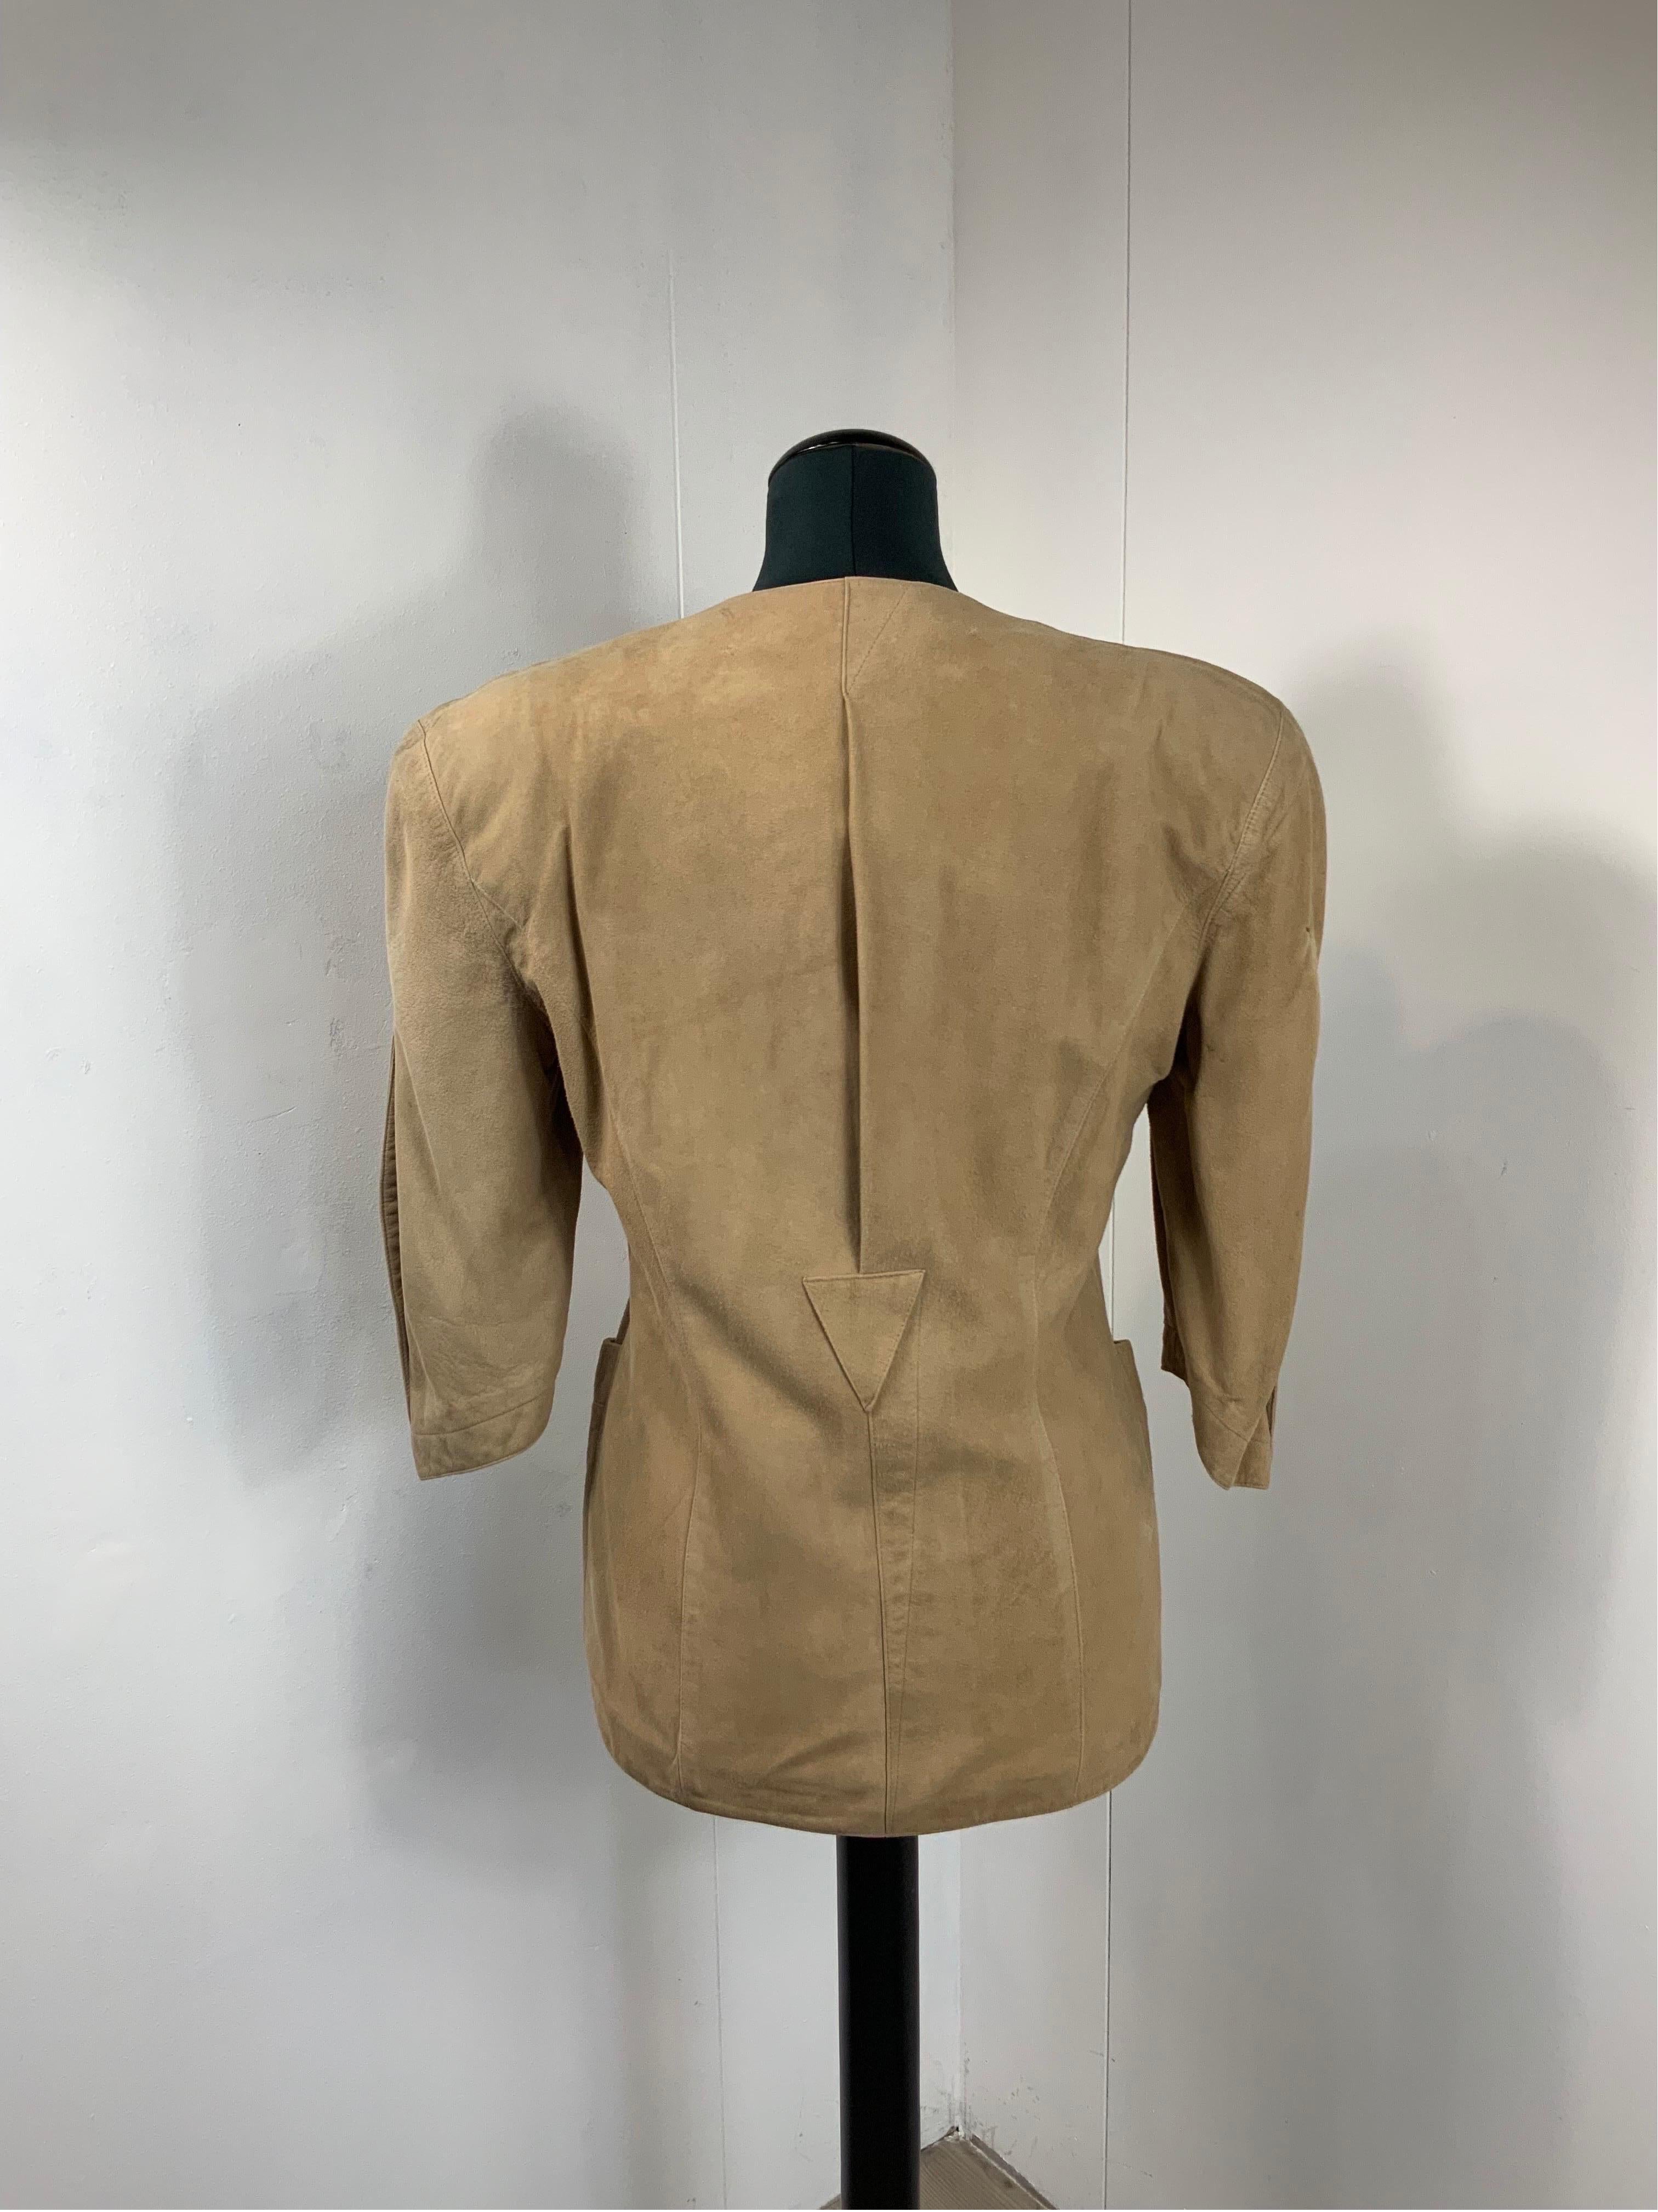 Thierry Mugler vintage suede jacket For Sale 1